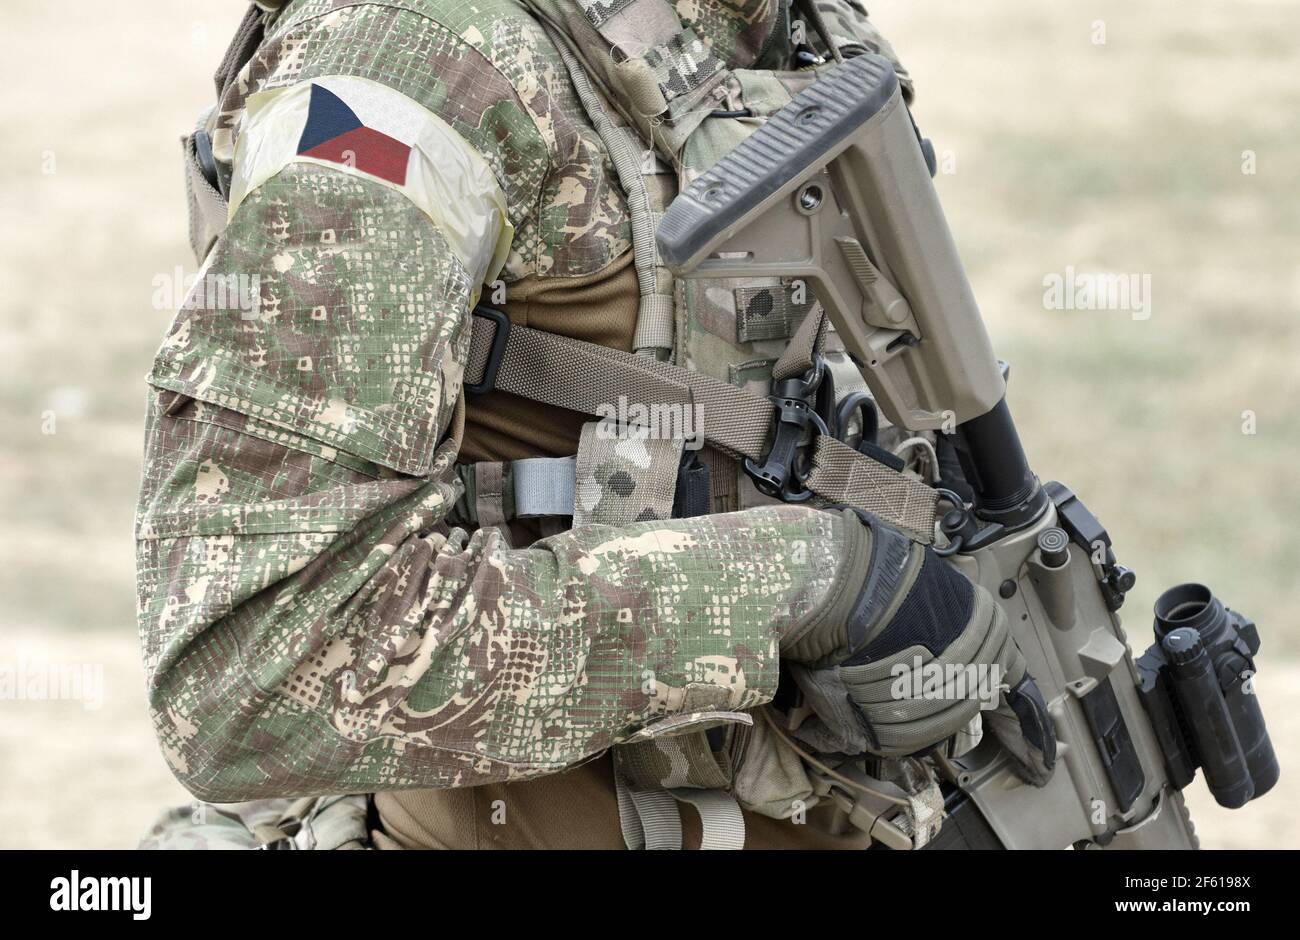 Soldier with assault rifle and flag of Czech Republic on military uniform. Collage. Stock Photo